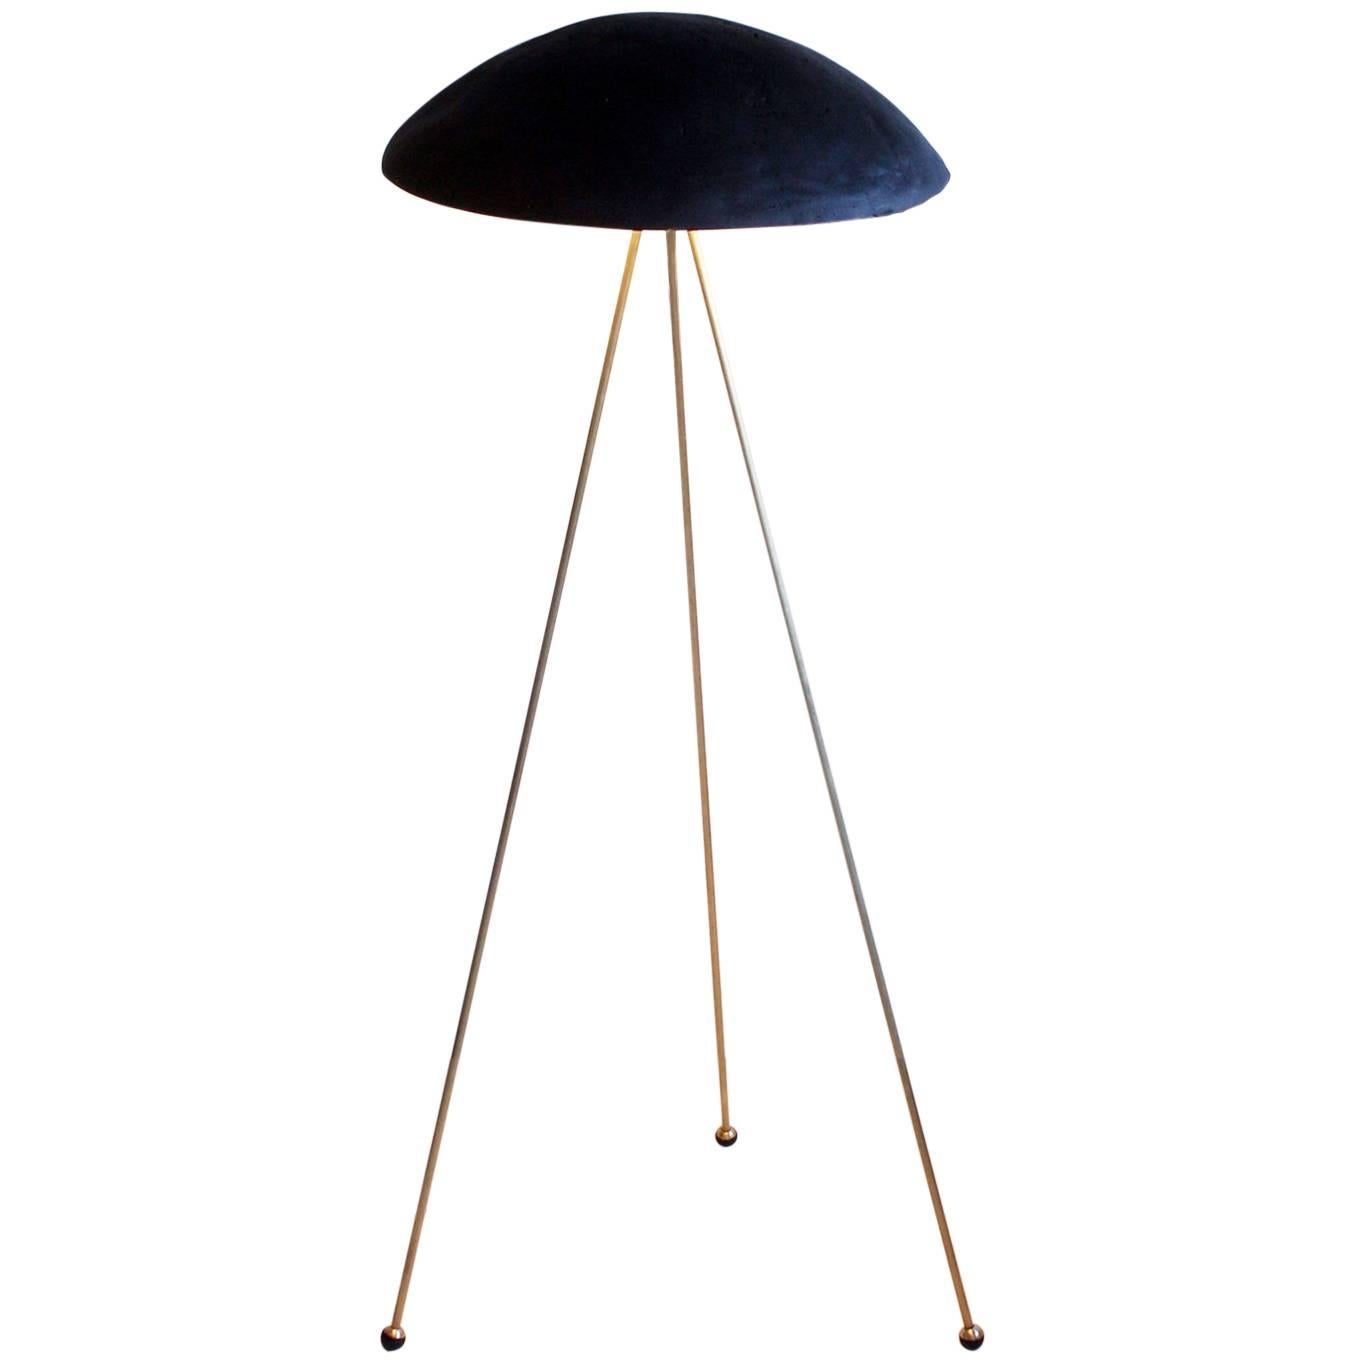 Tall Buddy Floor Lamp with Concrete Noggin and Brass Tripod Legs